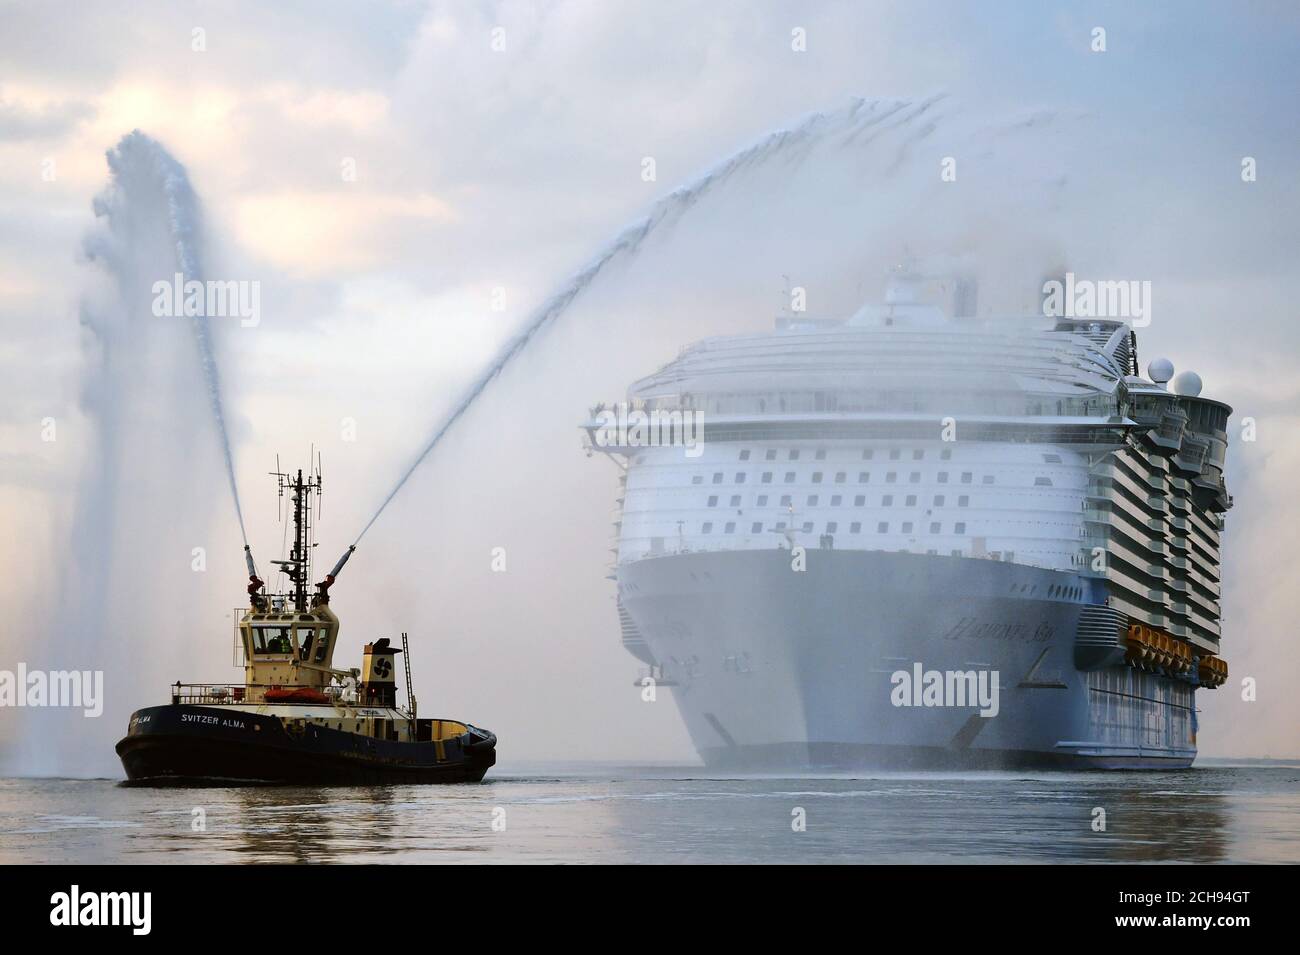 The world's largest passenger ship, MS Harmony of the Seas, owned by Royal Caribbean, makes her way up Southampton Water into Southampton ahead of her maiden cruise. Stock Photo